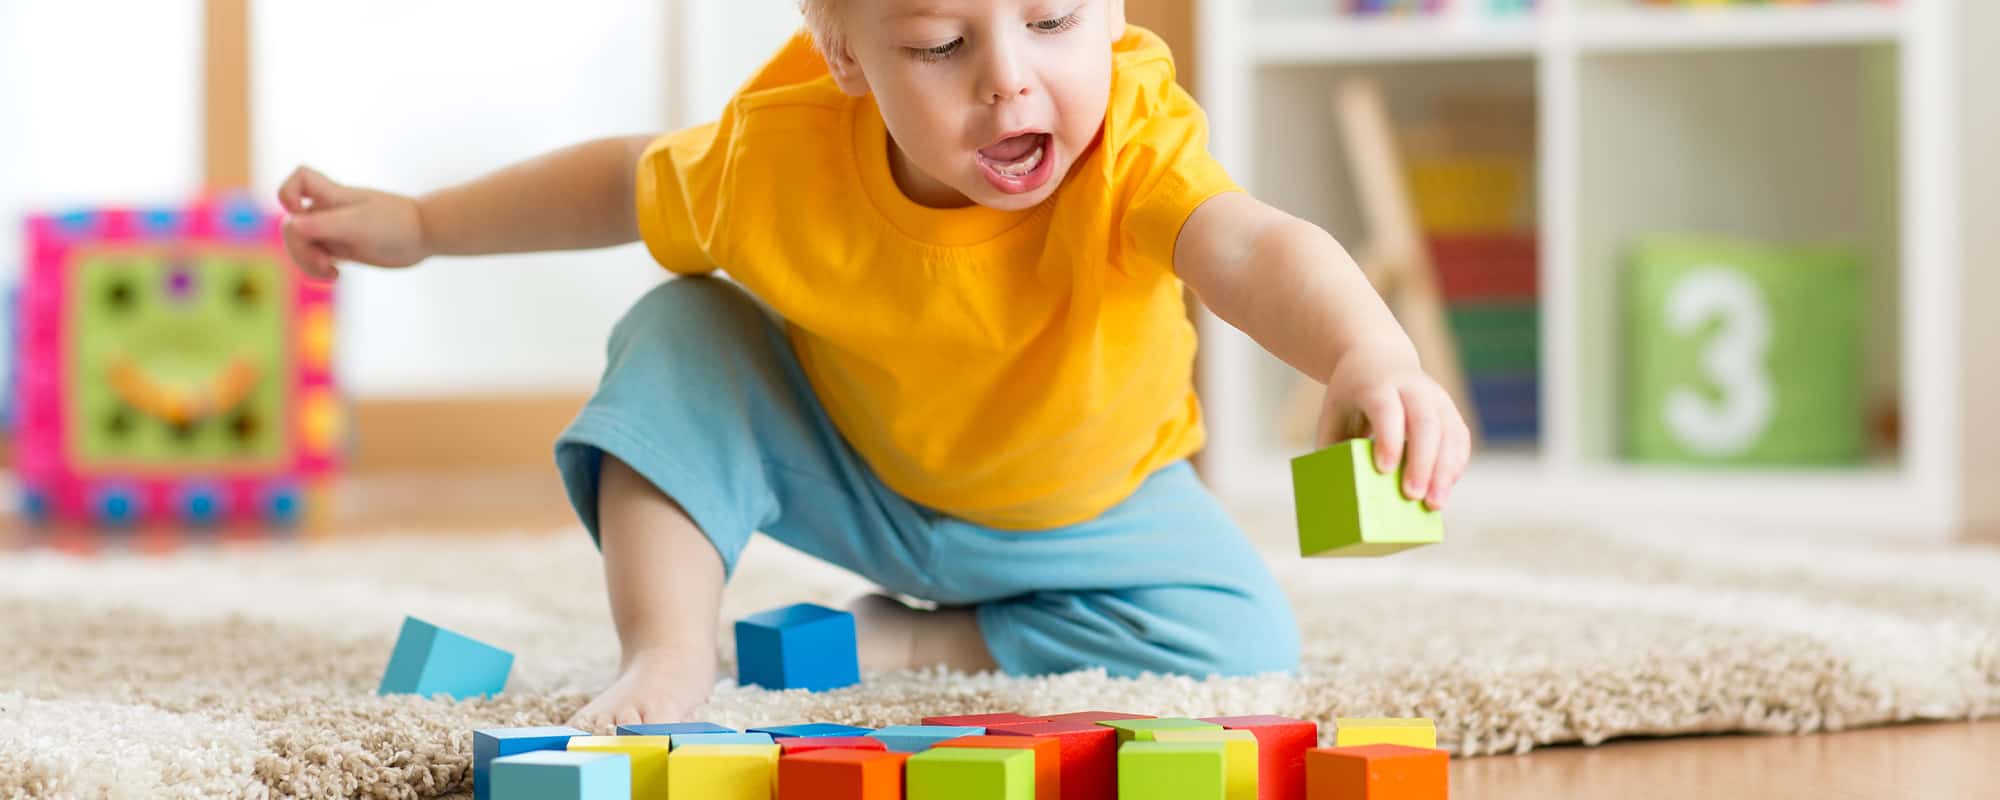 How Different Types of Play Develop Fine Motor Skills